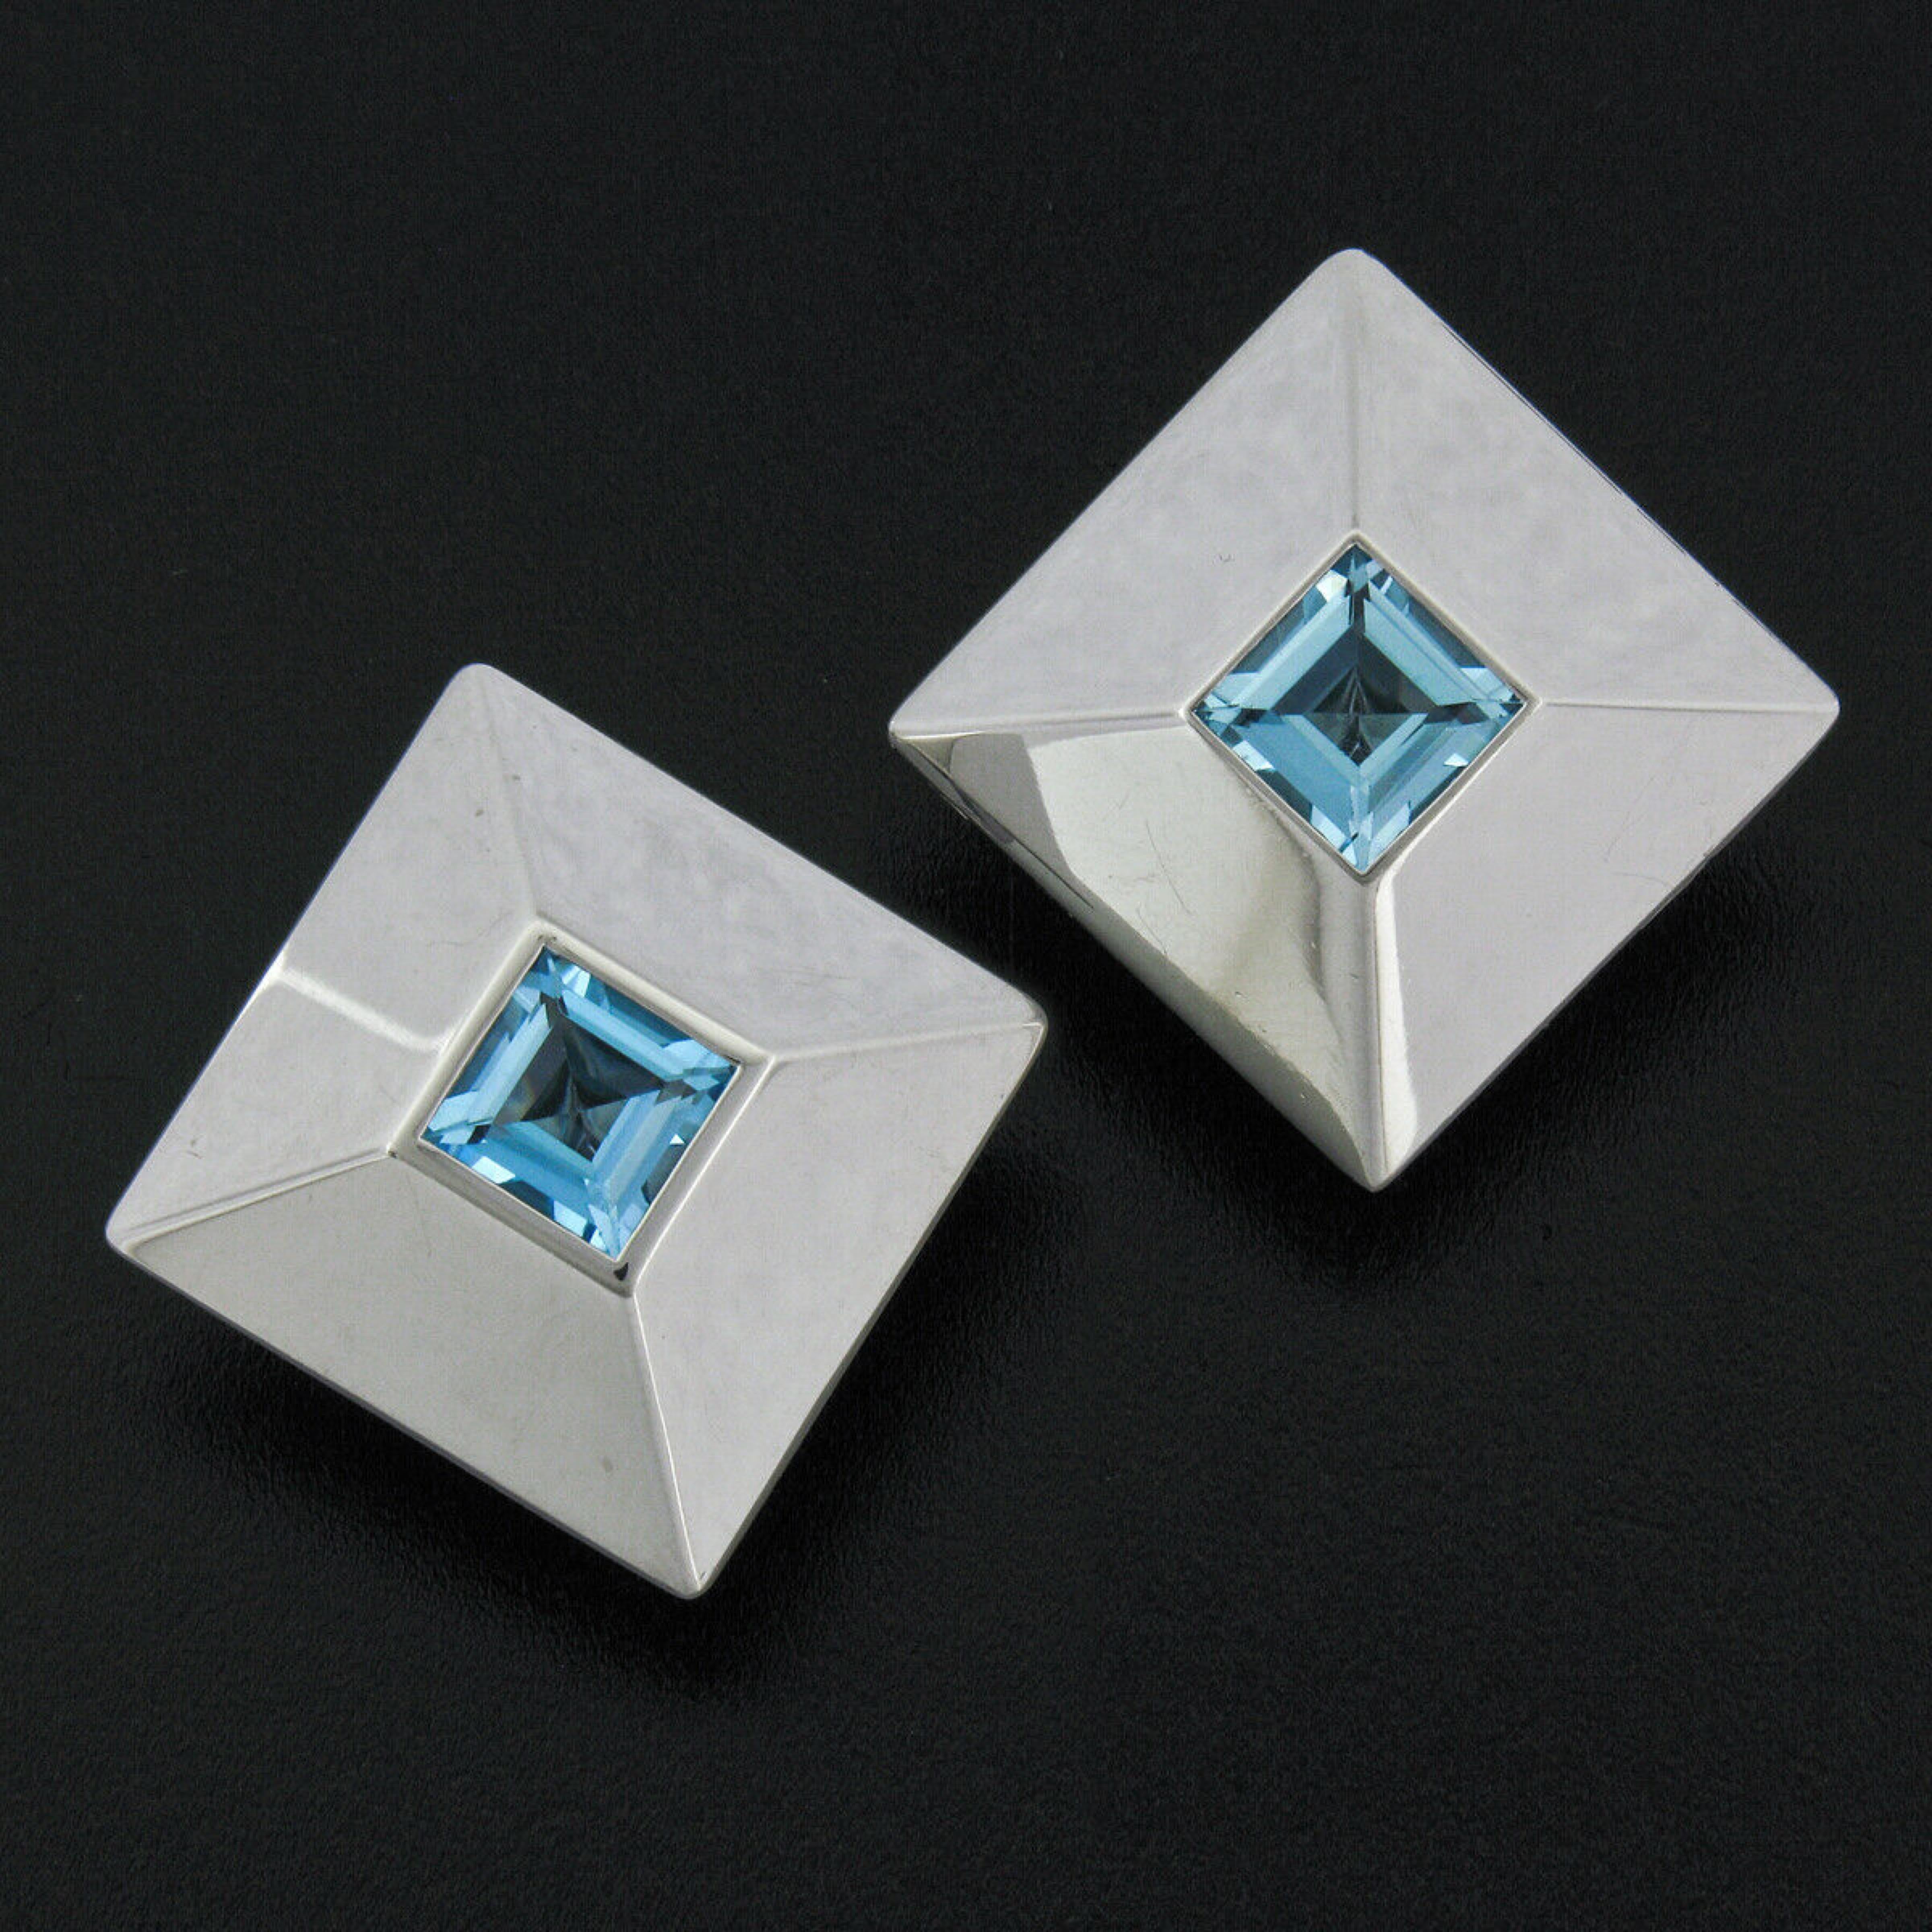 Here we have a bold and sharp looking pair of guaranteed 100% authentic Chopard earrings. The earrings feature a very classy and smooth pyramid design each bezel set at its center with a large, approximately 2.70 carat, square step cut blue topaz.